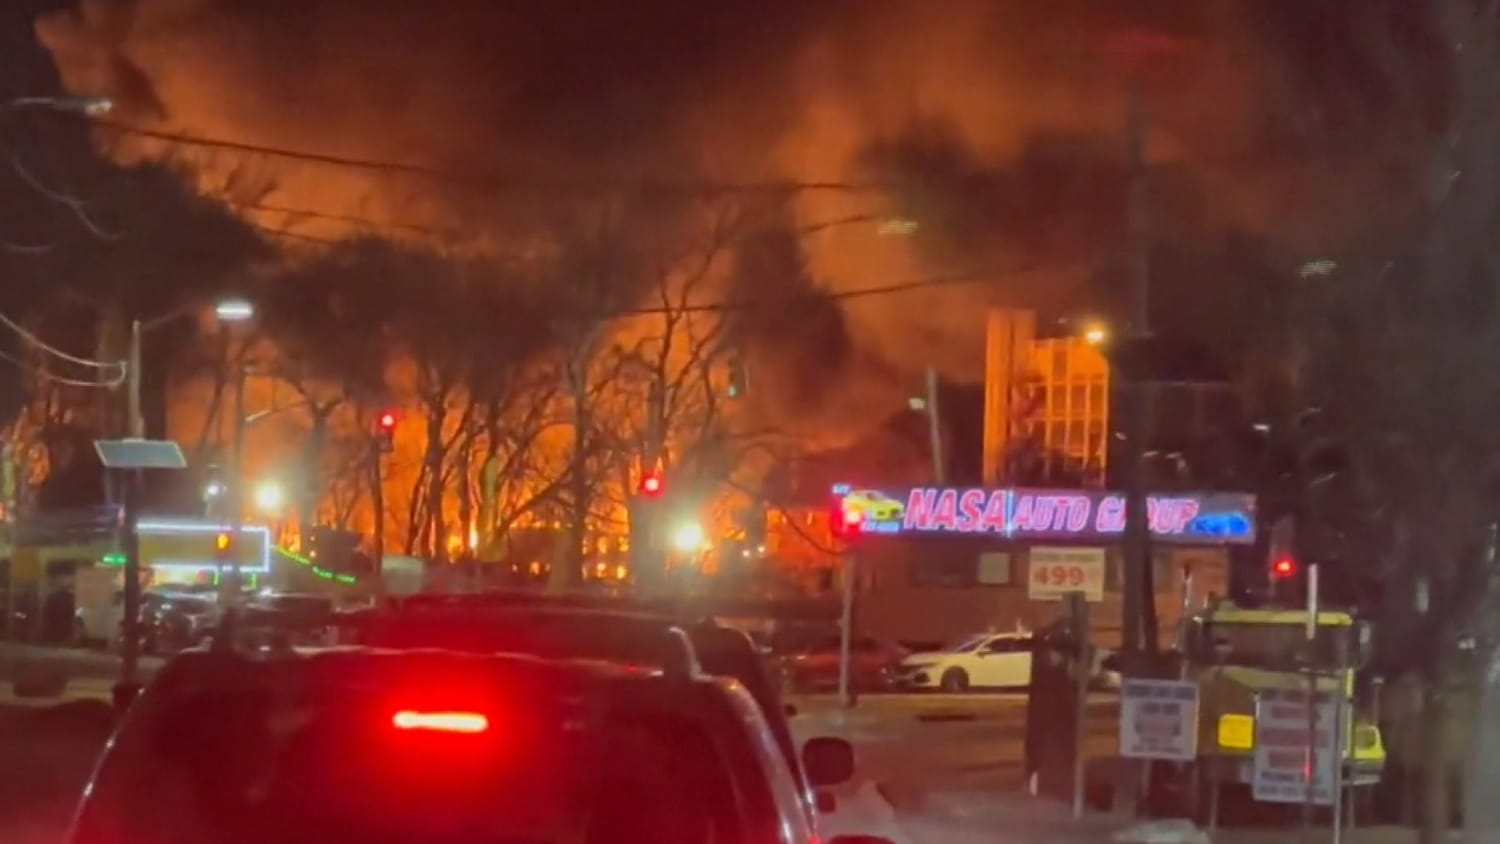 One firefighter injured in massive blaze at chemical plant in Passaic, New Jersey 